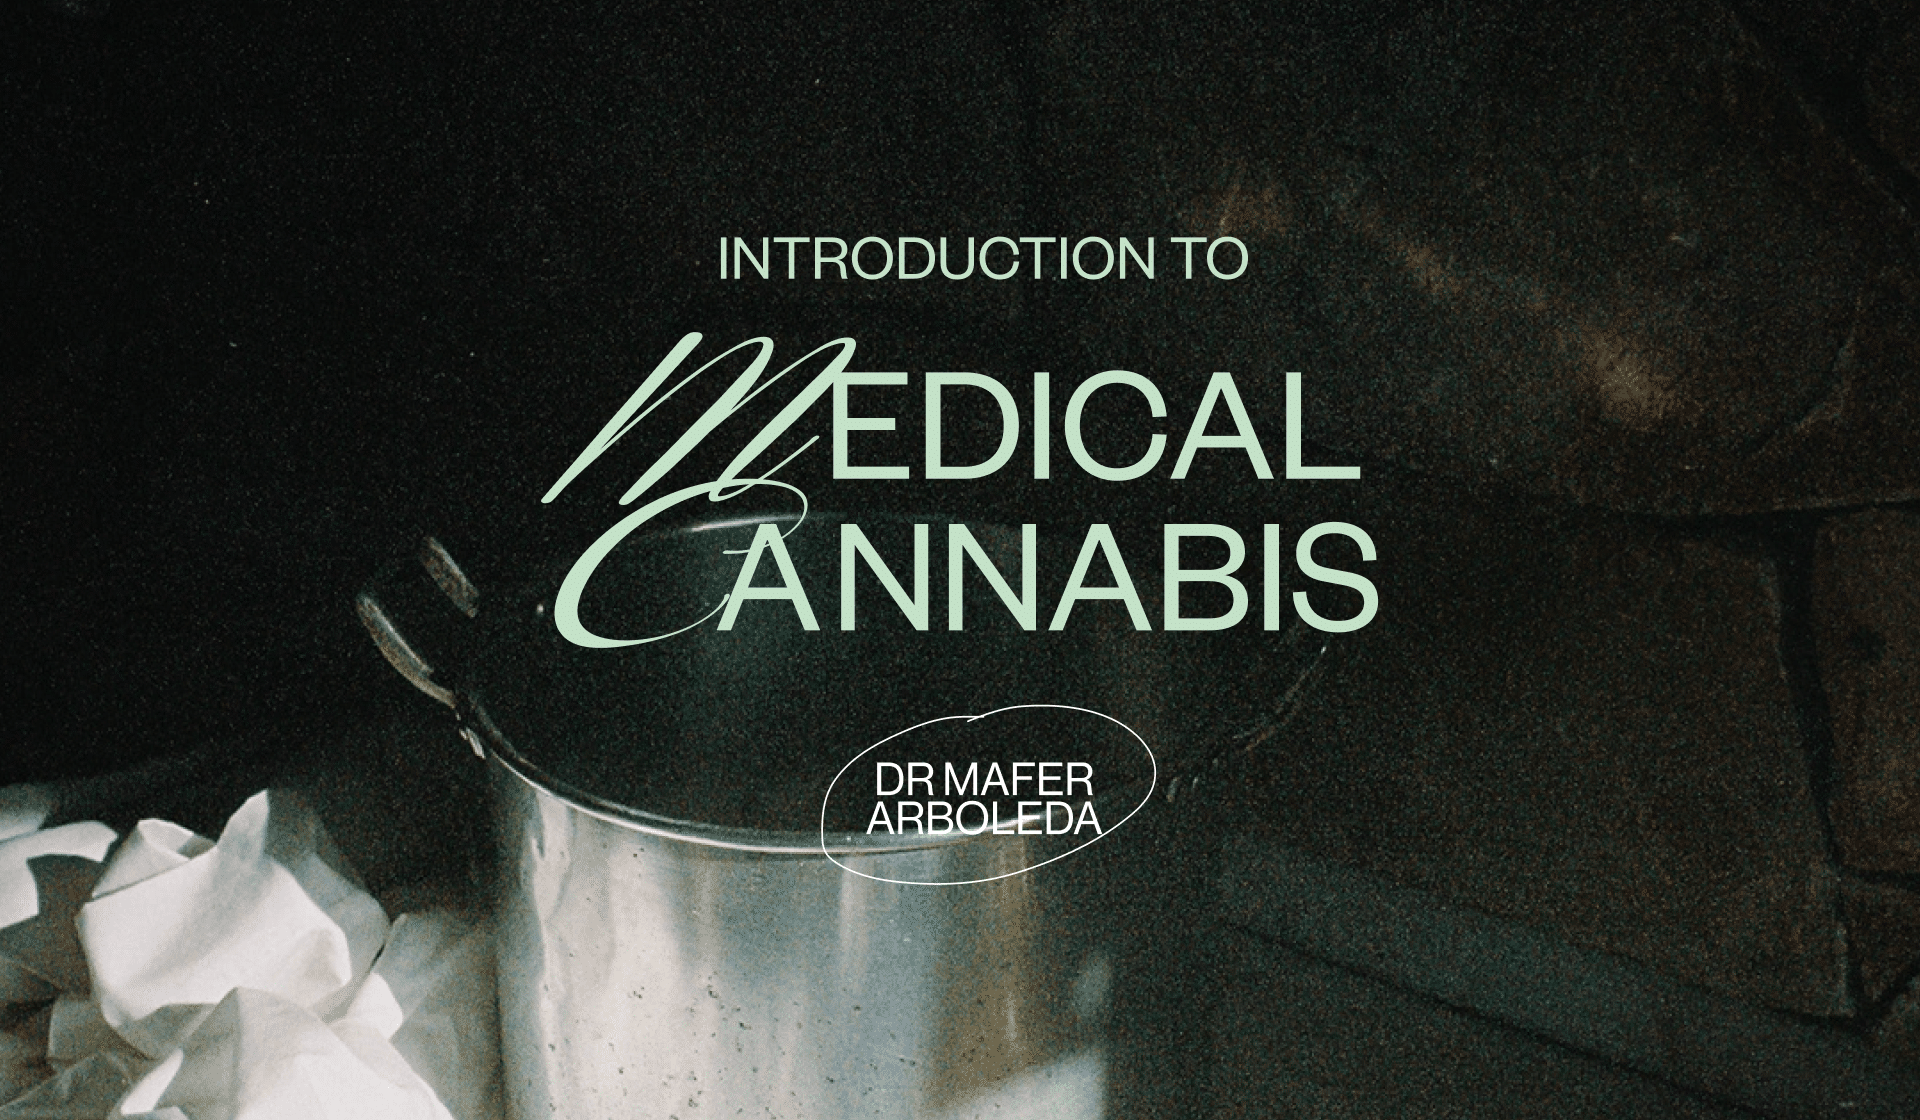 Introduction to Medical Cannabis